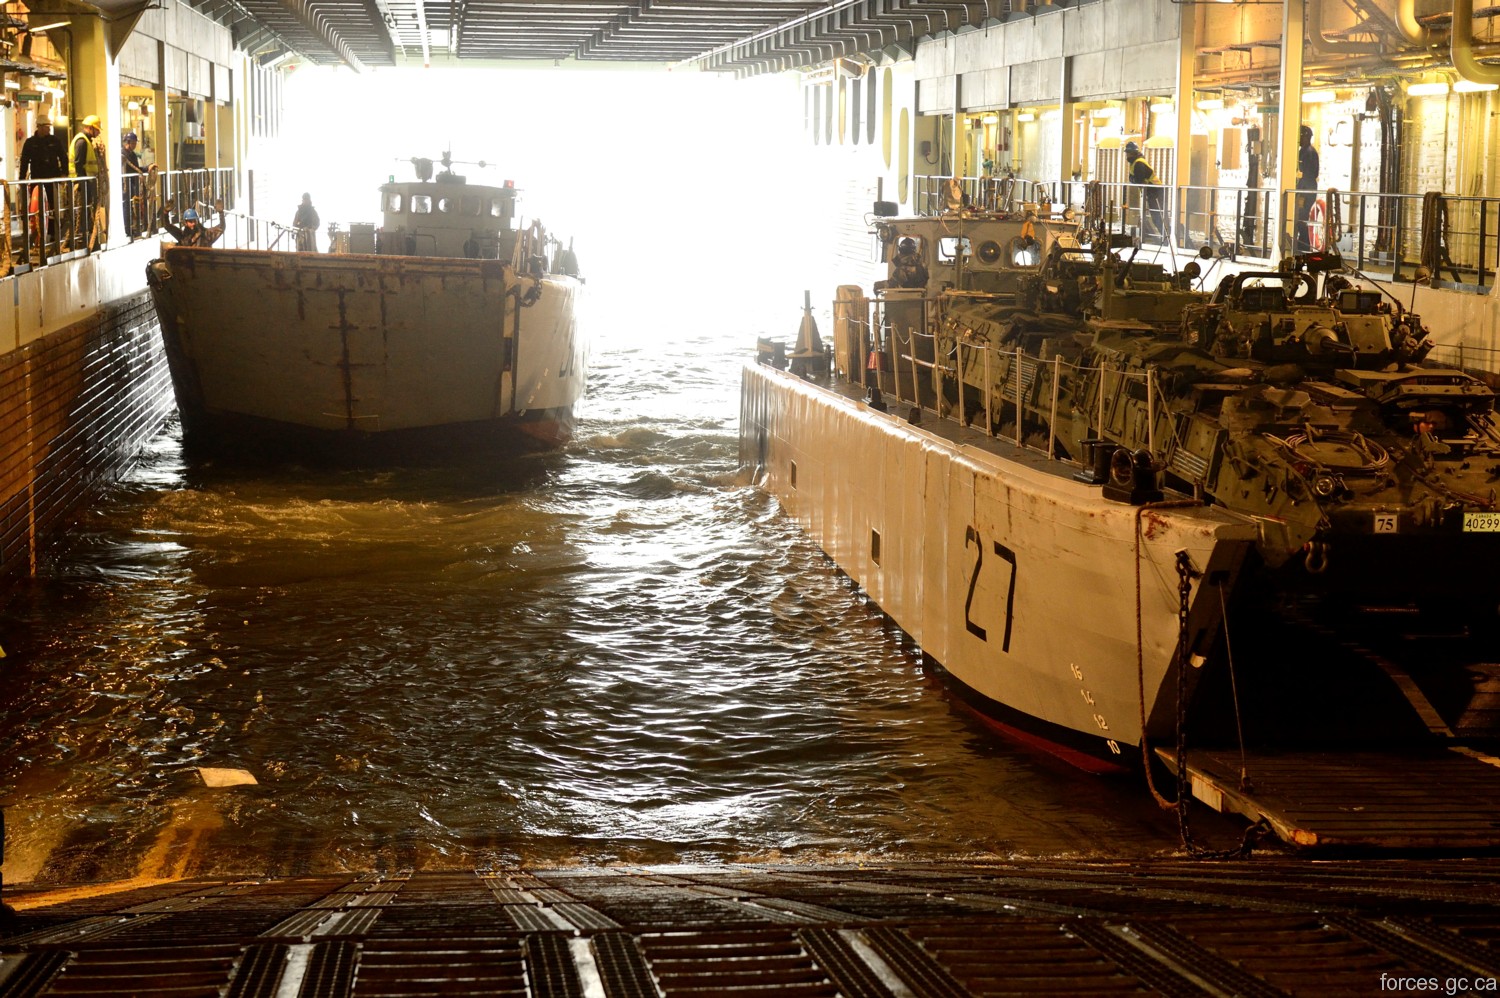 l-9013 fs mistral amphibious assault command ship french navy marine nationale 50 well deck landing craft ctm